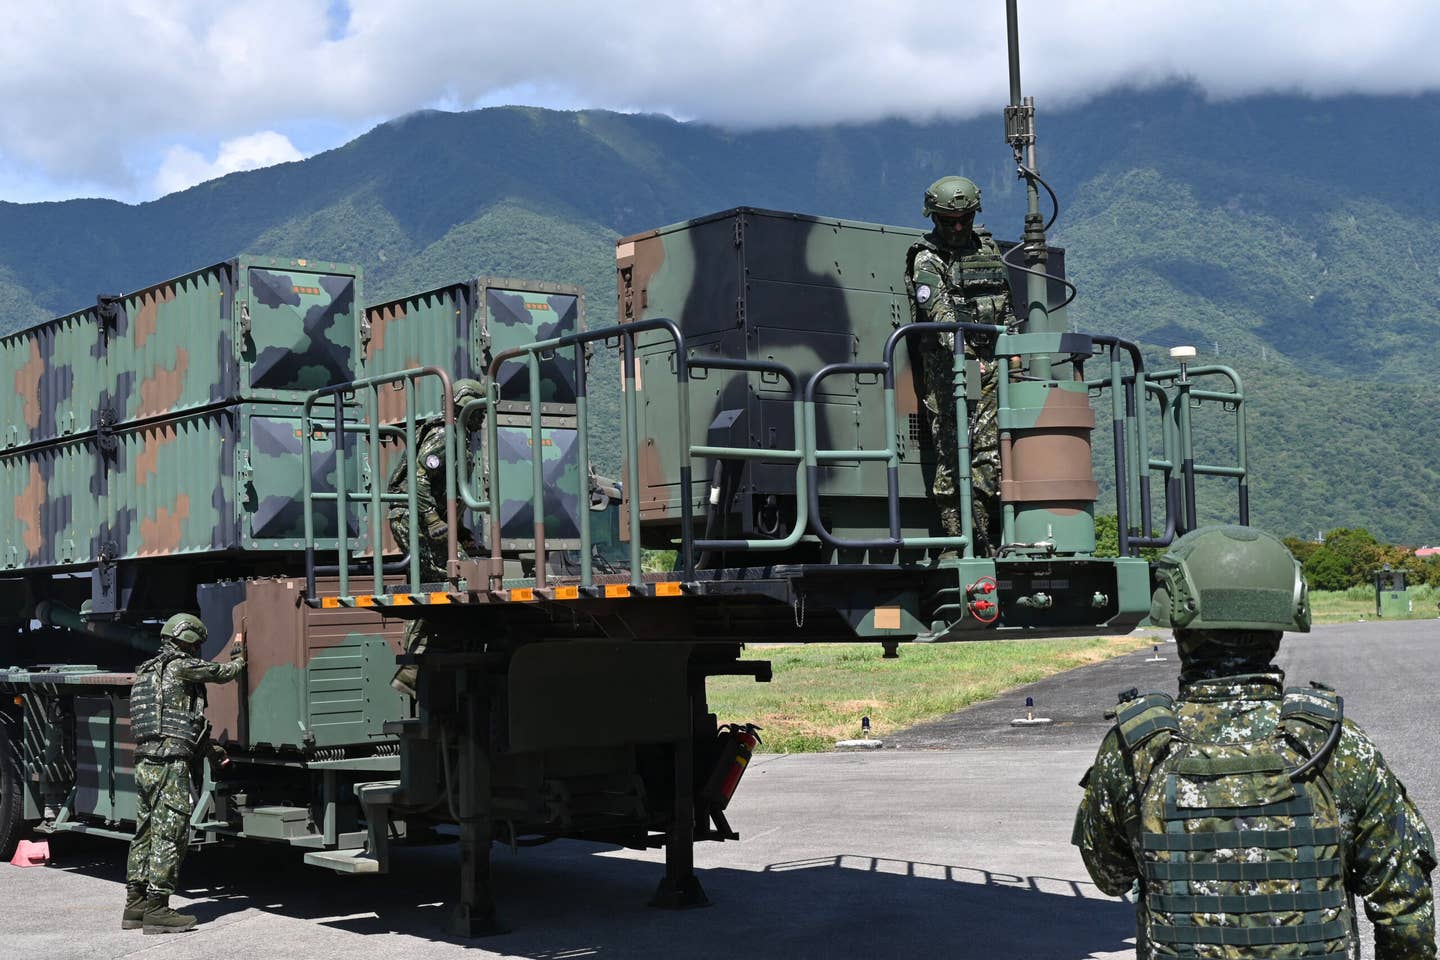 Taiwanese soldiers demonstrate the operation of the locally-developed Sky Bow III surface-to-air missile system during a media event at Hualien Air Force Base on August 18, 2022. (Photo by Sam Yeh / AFP) (Photo by SAM YEH/AFP via Getty Images)